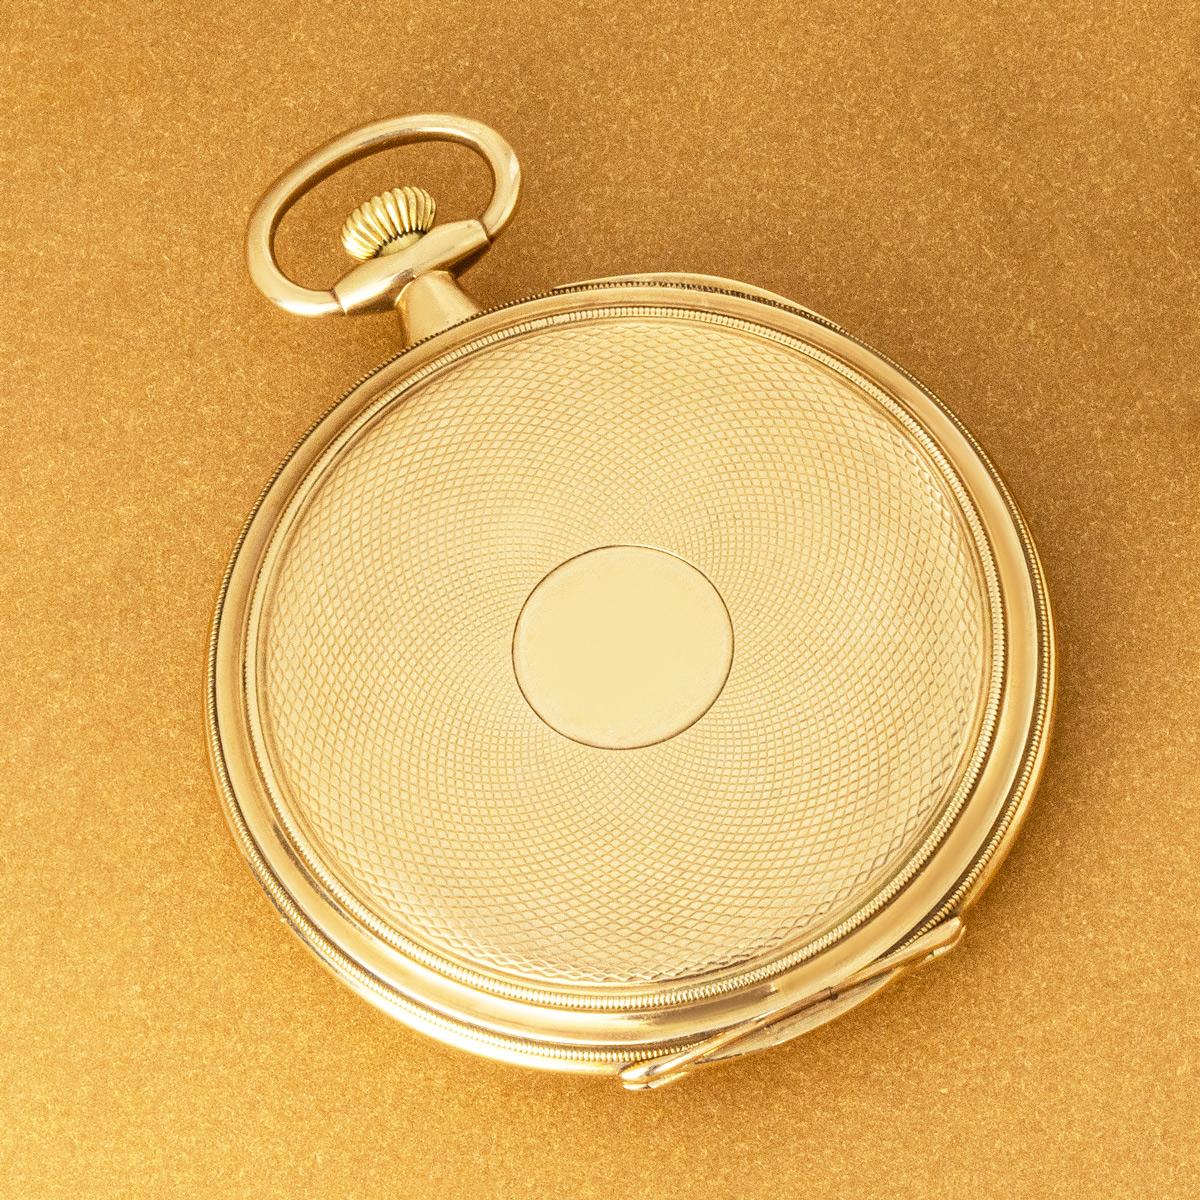 Patek Philippe. A Gold Keyless Lever Pocket Watch C1914 In Excellent Condition For Sale In London, GB